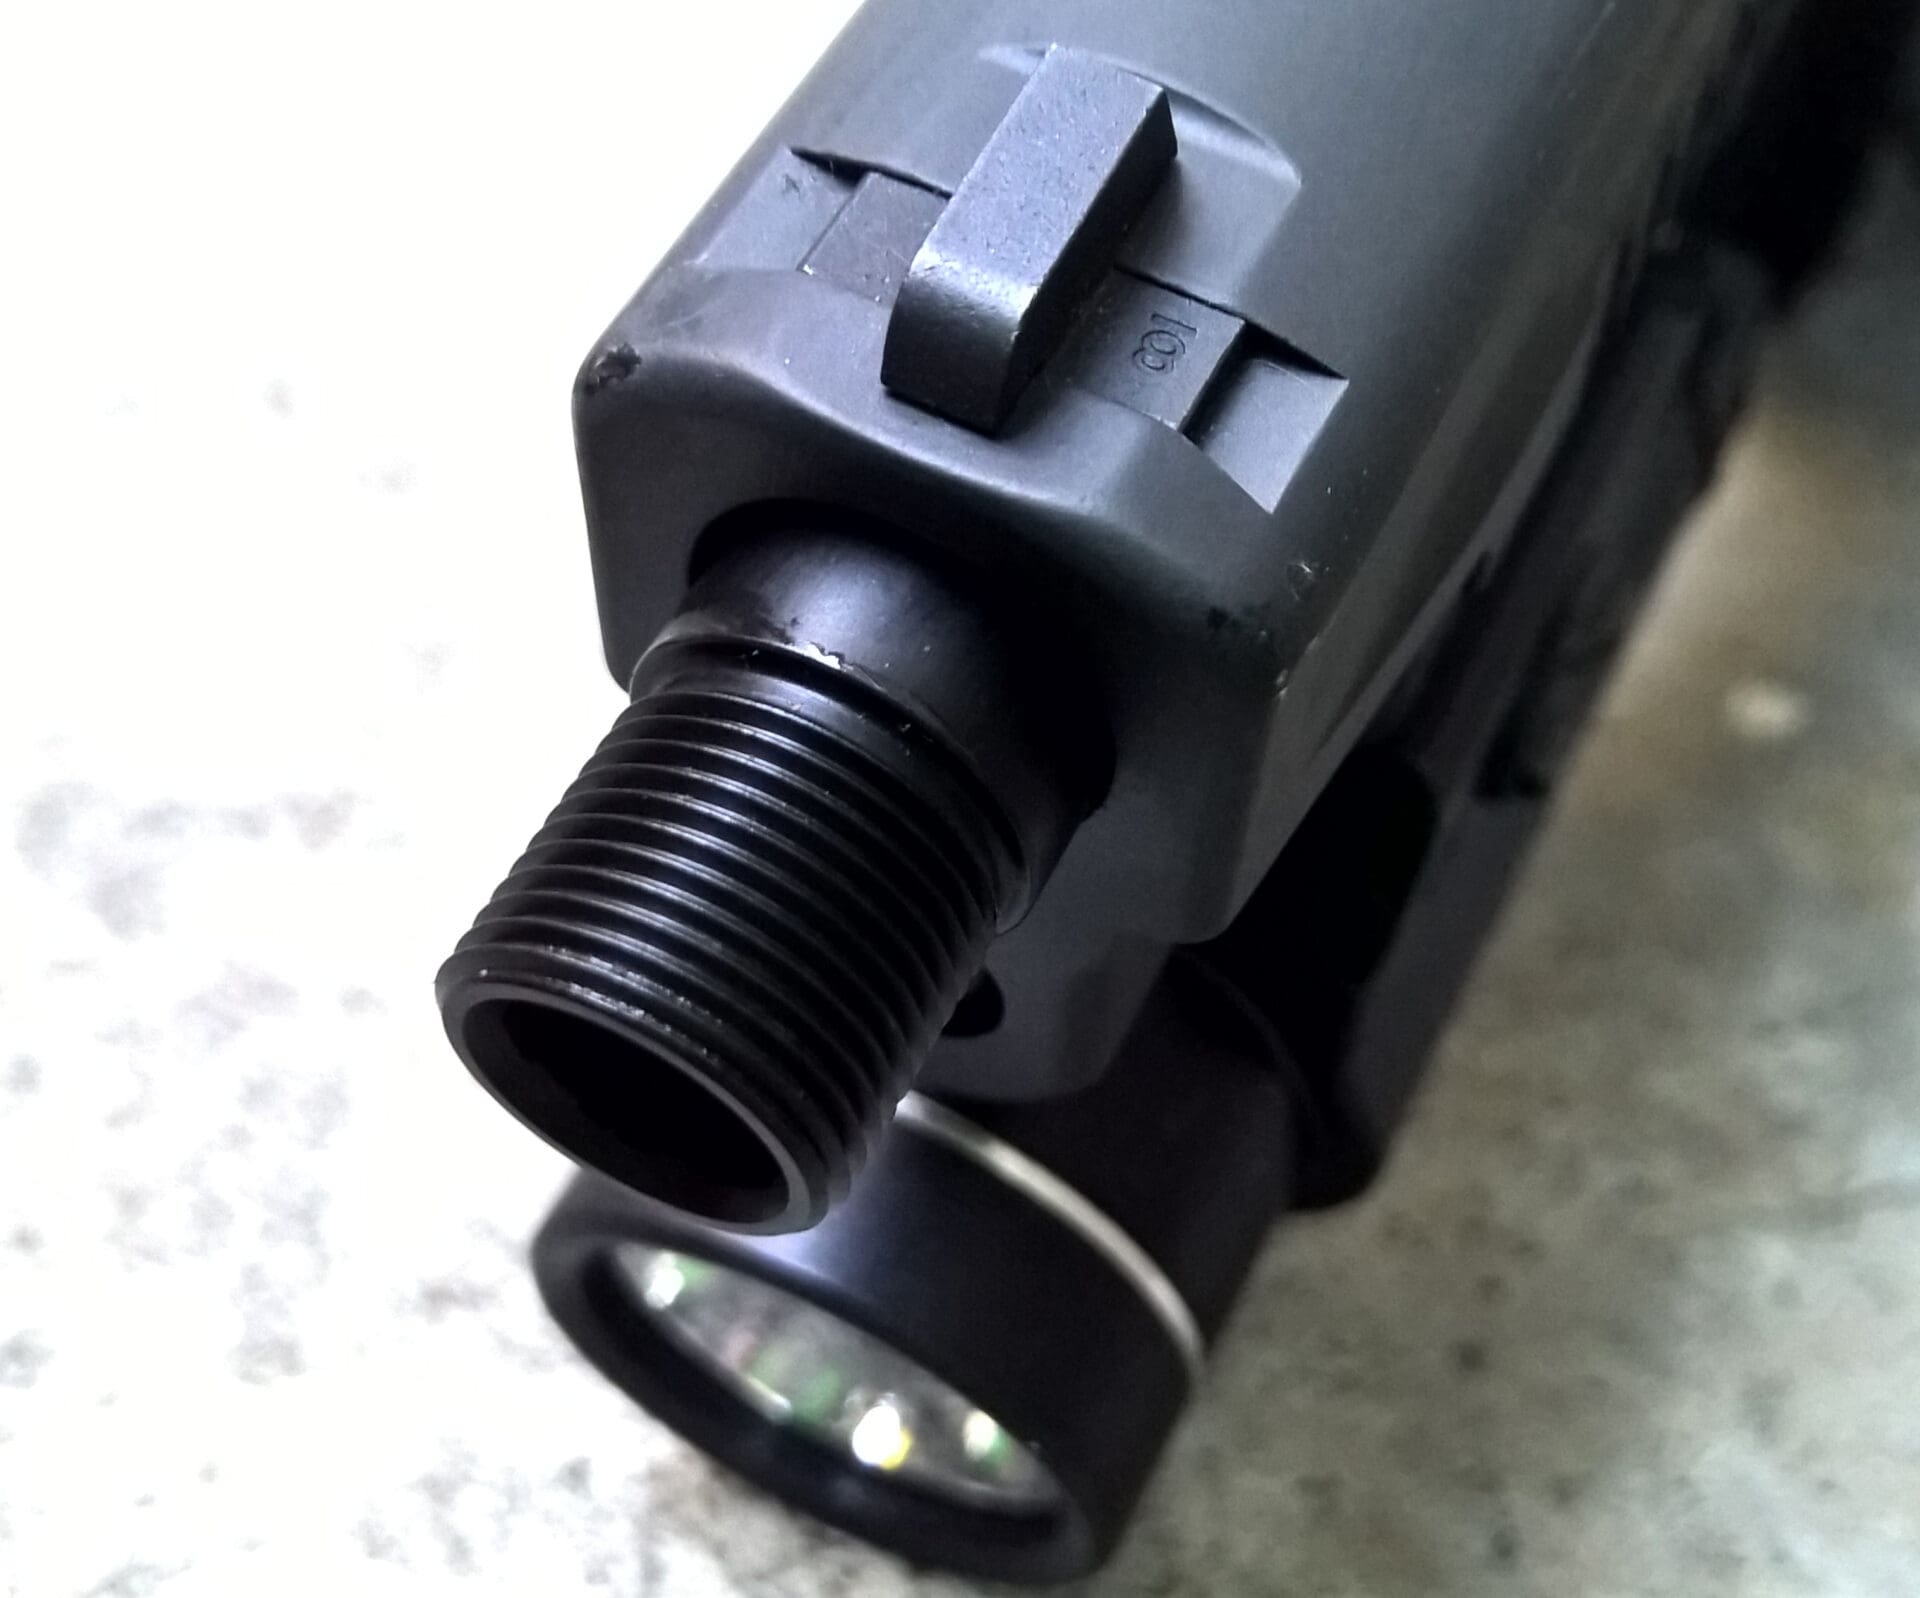 The muzzle of the barrel features nicely-cut 1/2 × 28 threading. 